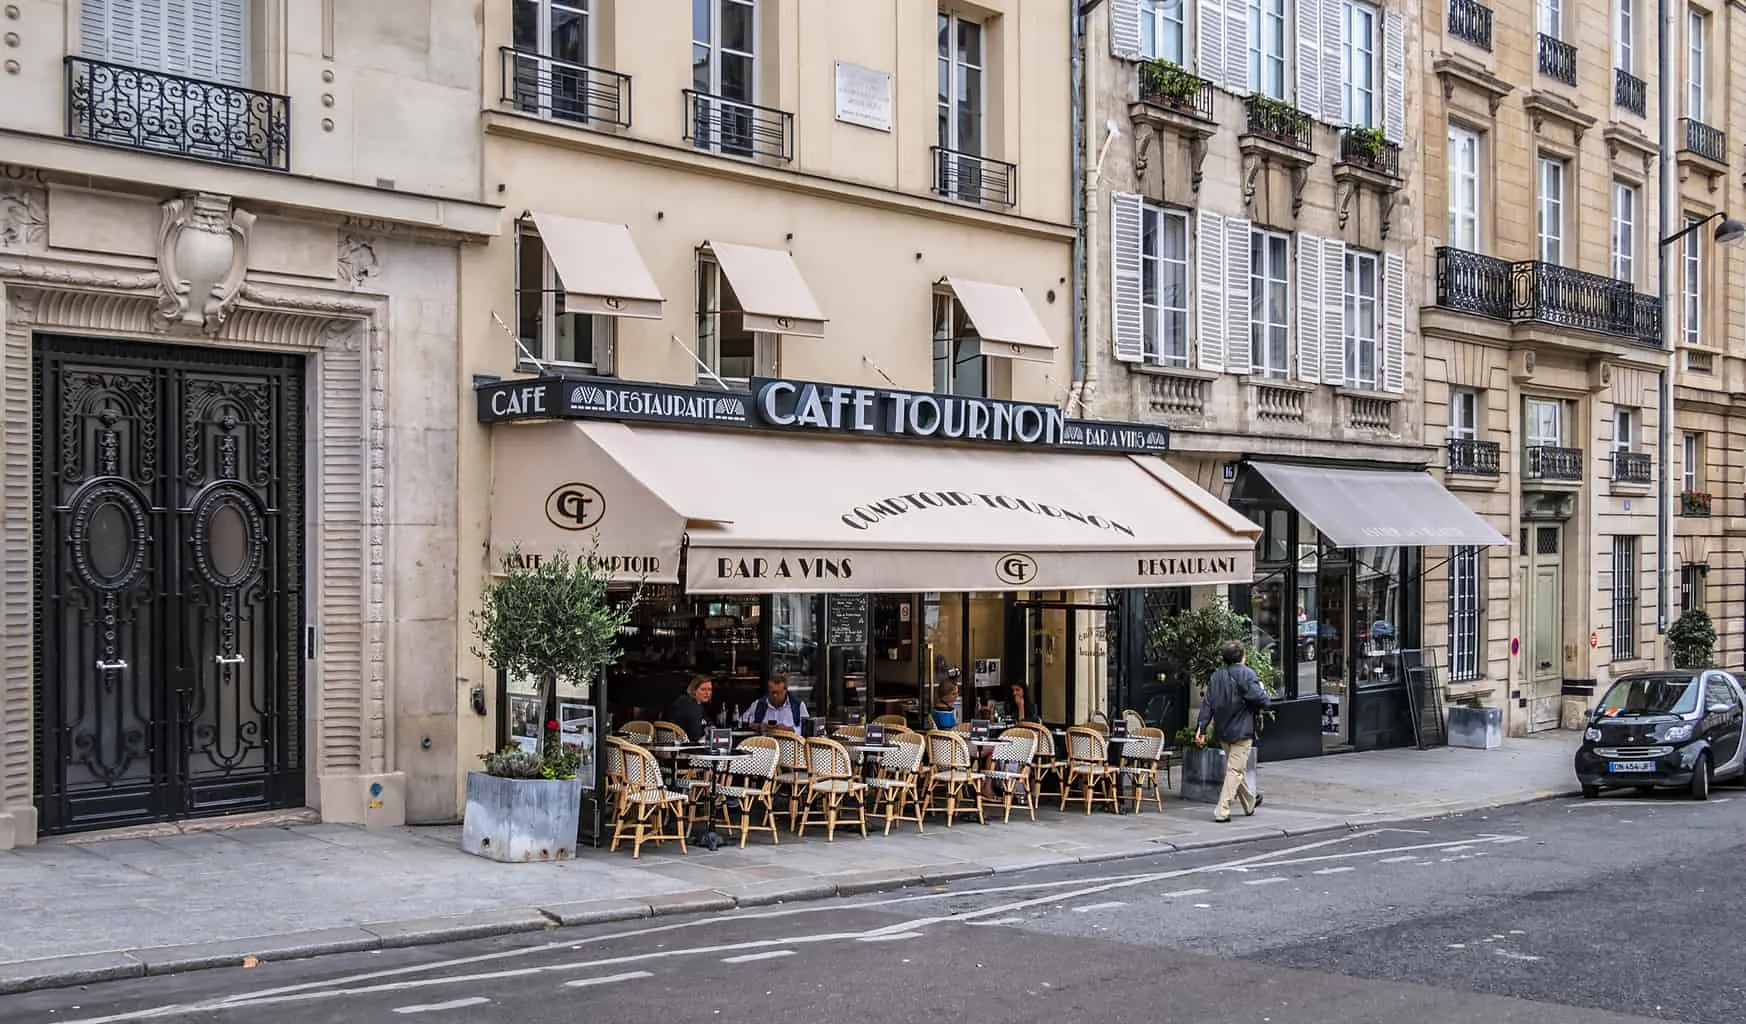 Go where the locals go in Paris and give the ever swanky, Cafe Tournon a try!